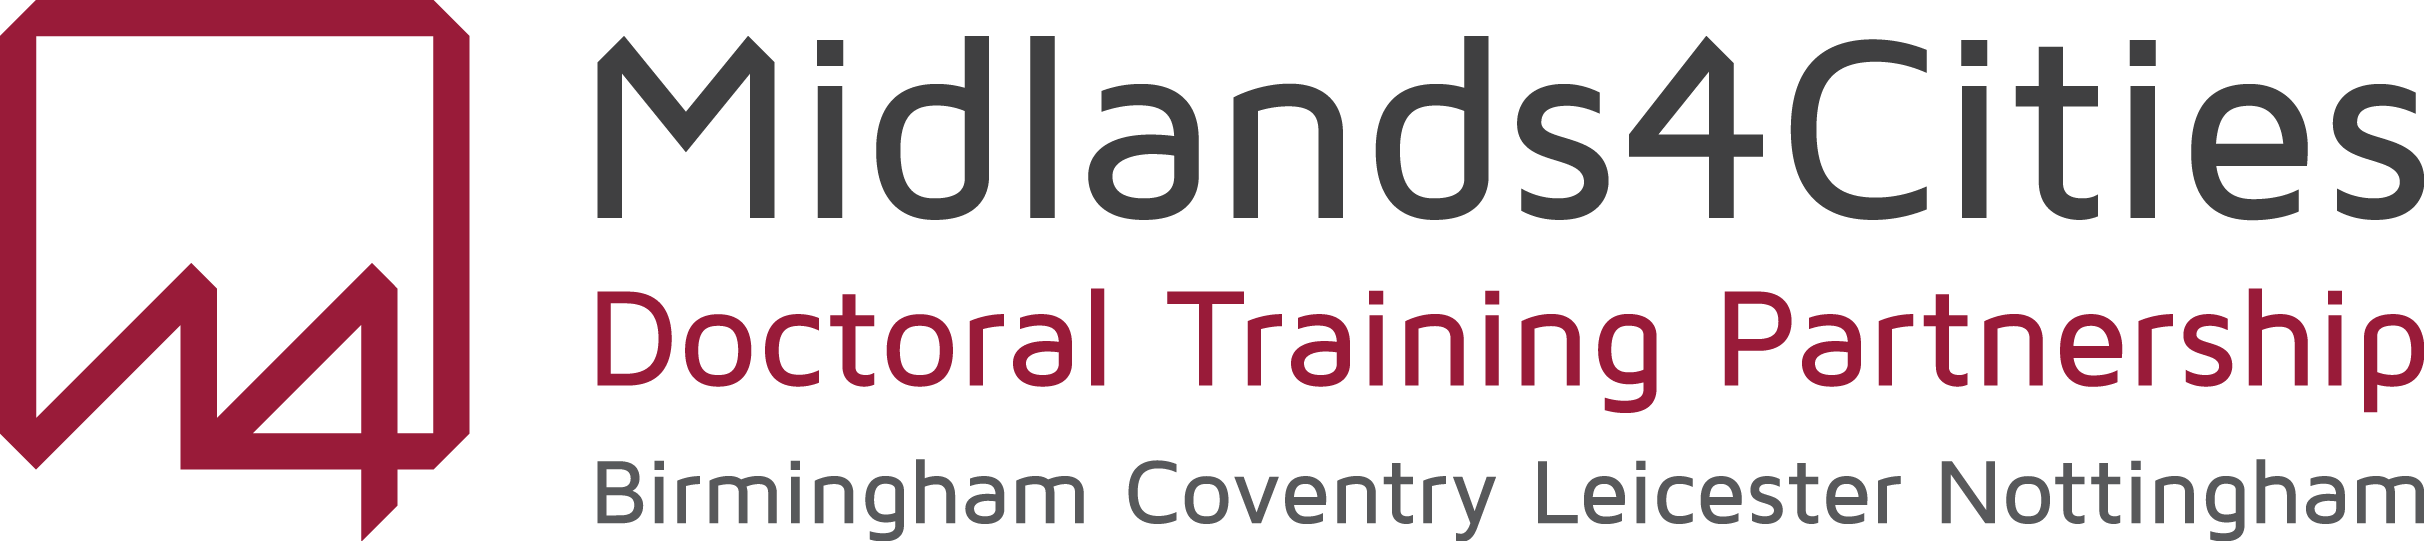 Midlands4Cities (M4C) PhD funding- University of Leicester